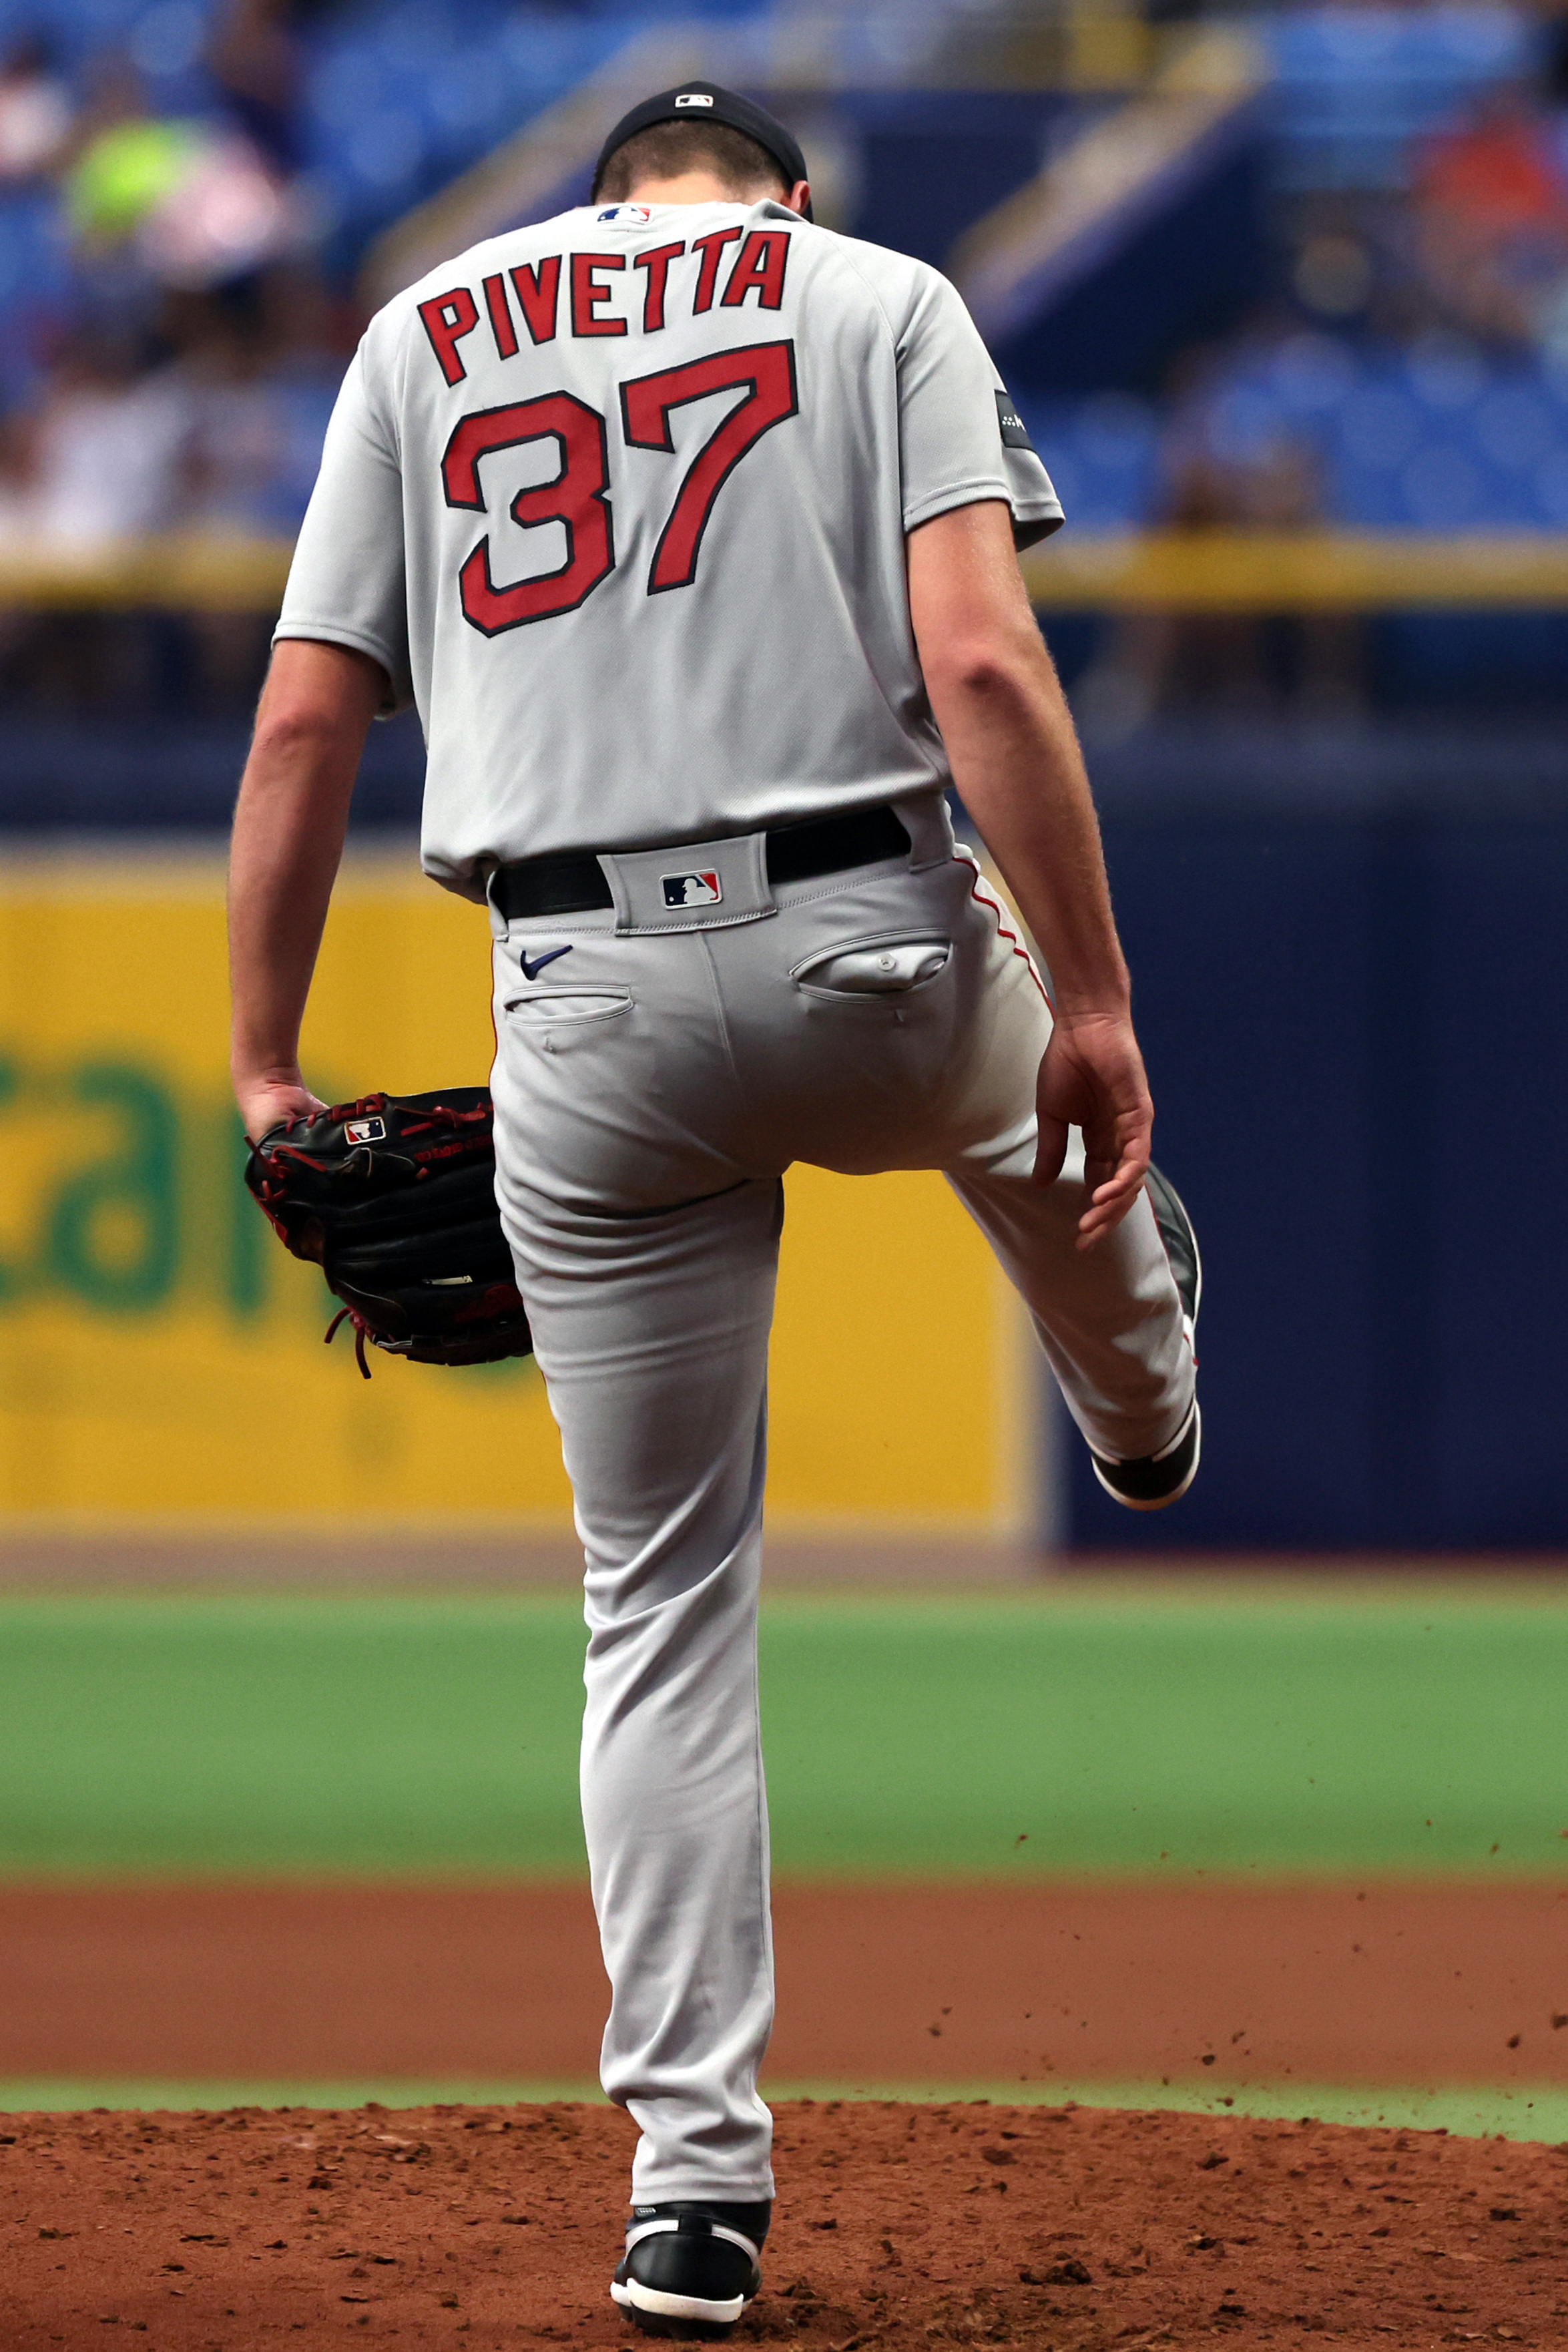 Glasnow ties career high with 14 strikeouts and Rays continue home  dominance over Red Sox, 3-1 Florida & Sun News - Bally Sports